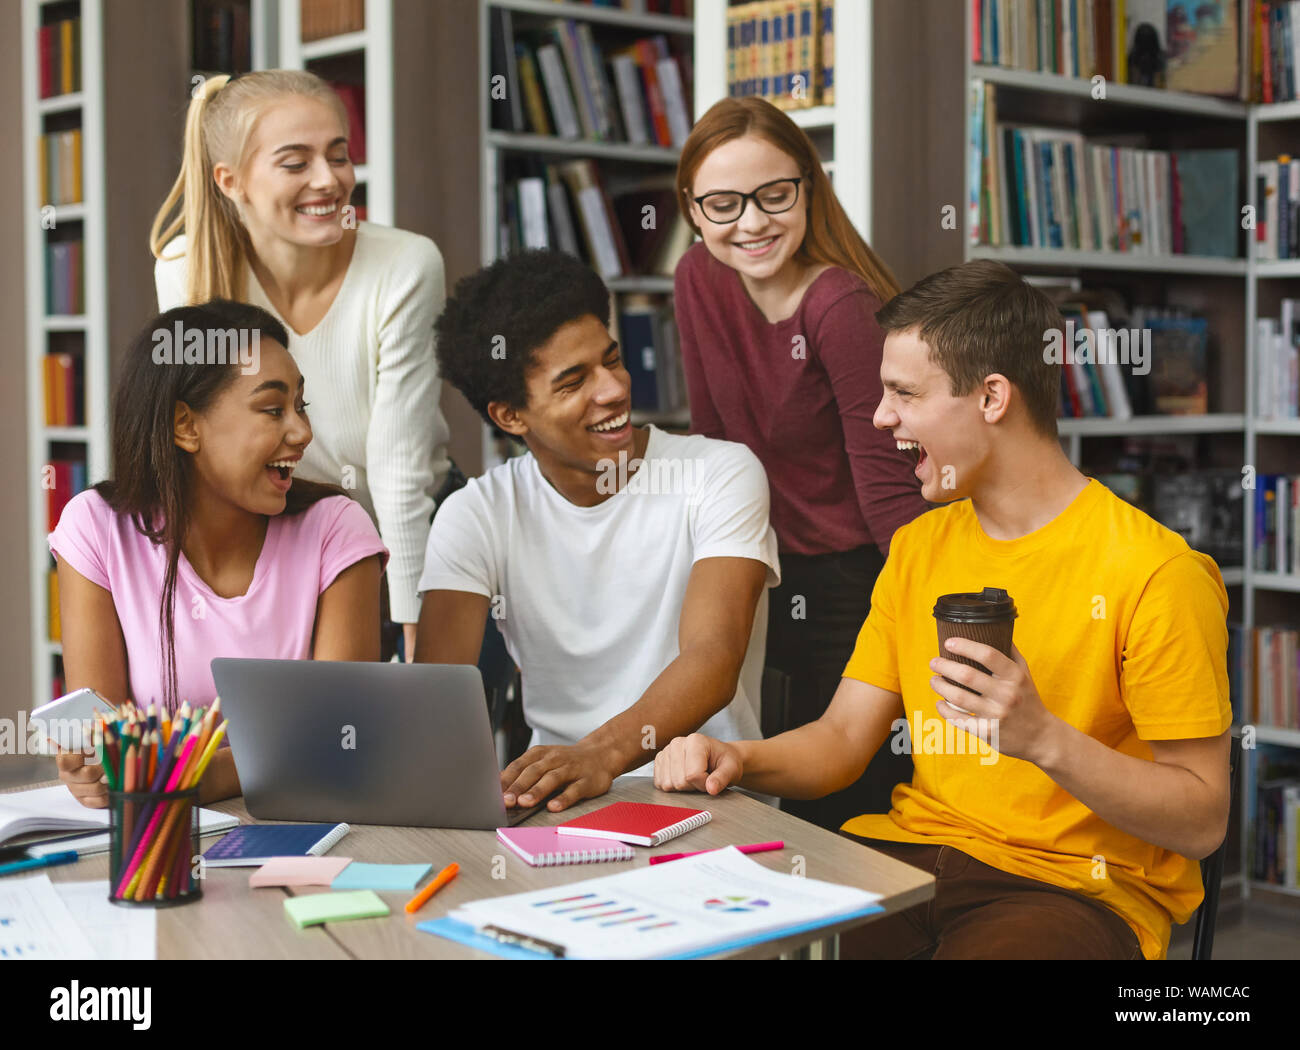 Enthusiastic teenager sharing his ideas with classmates Stock Photo